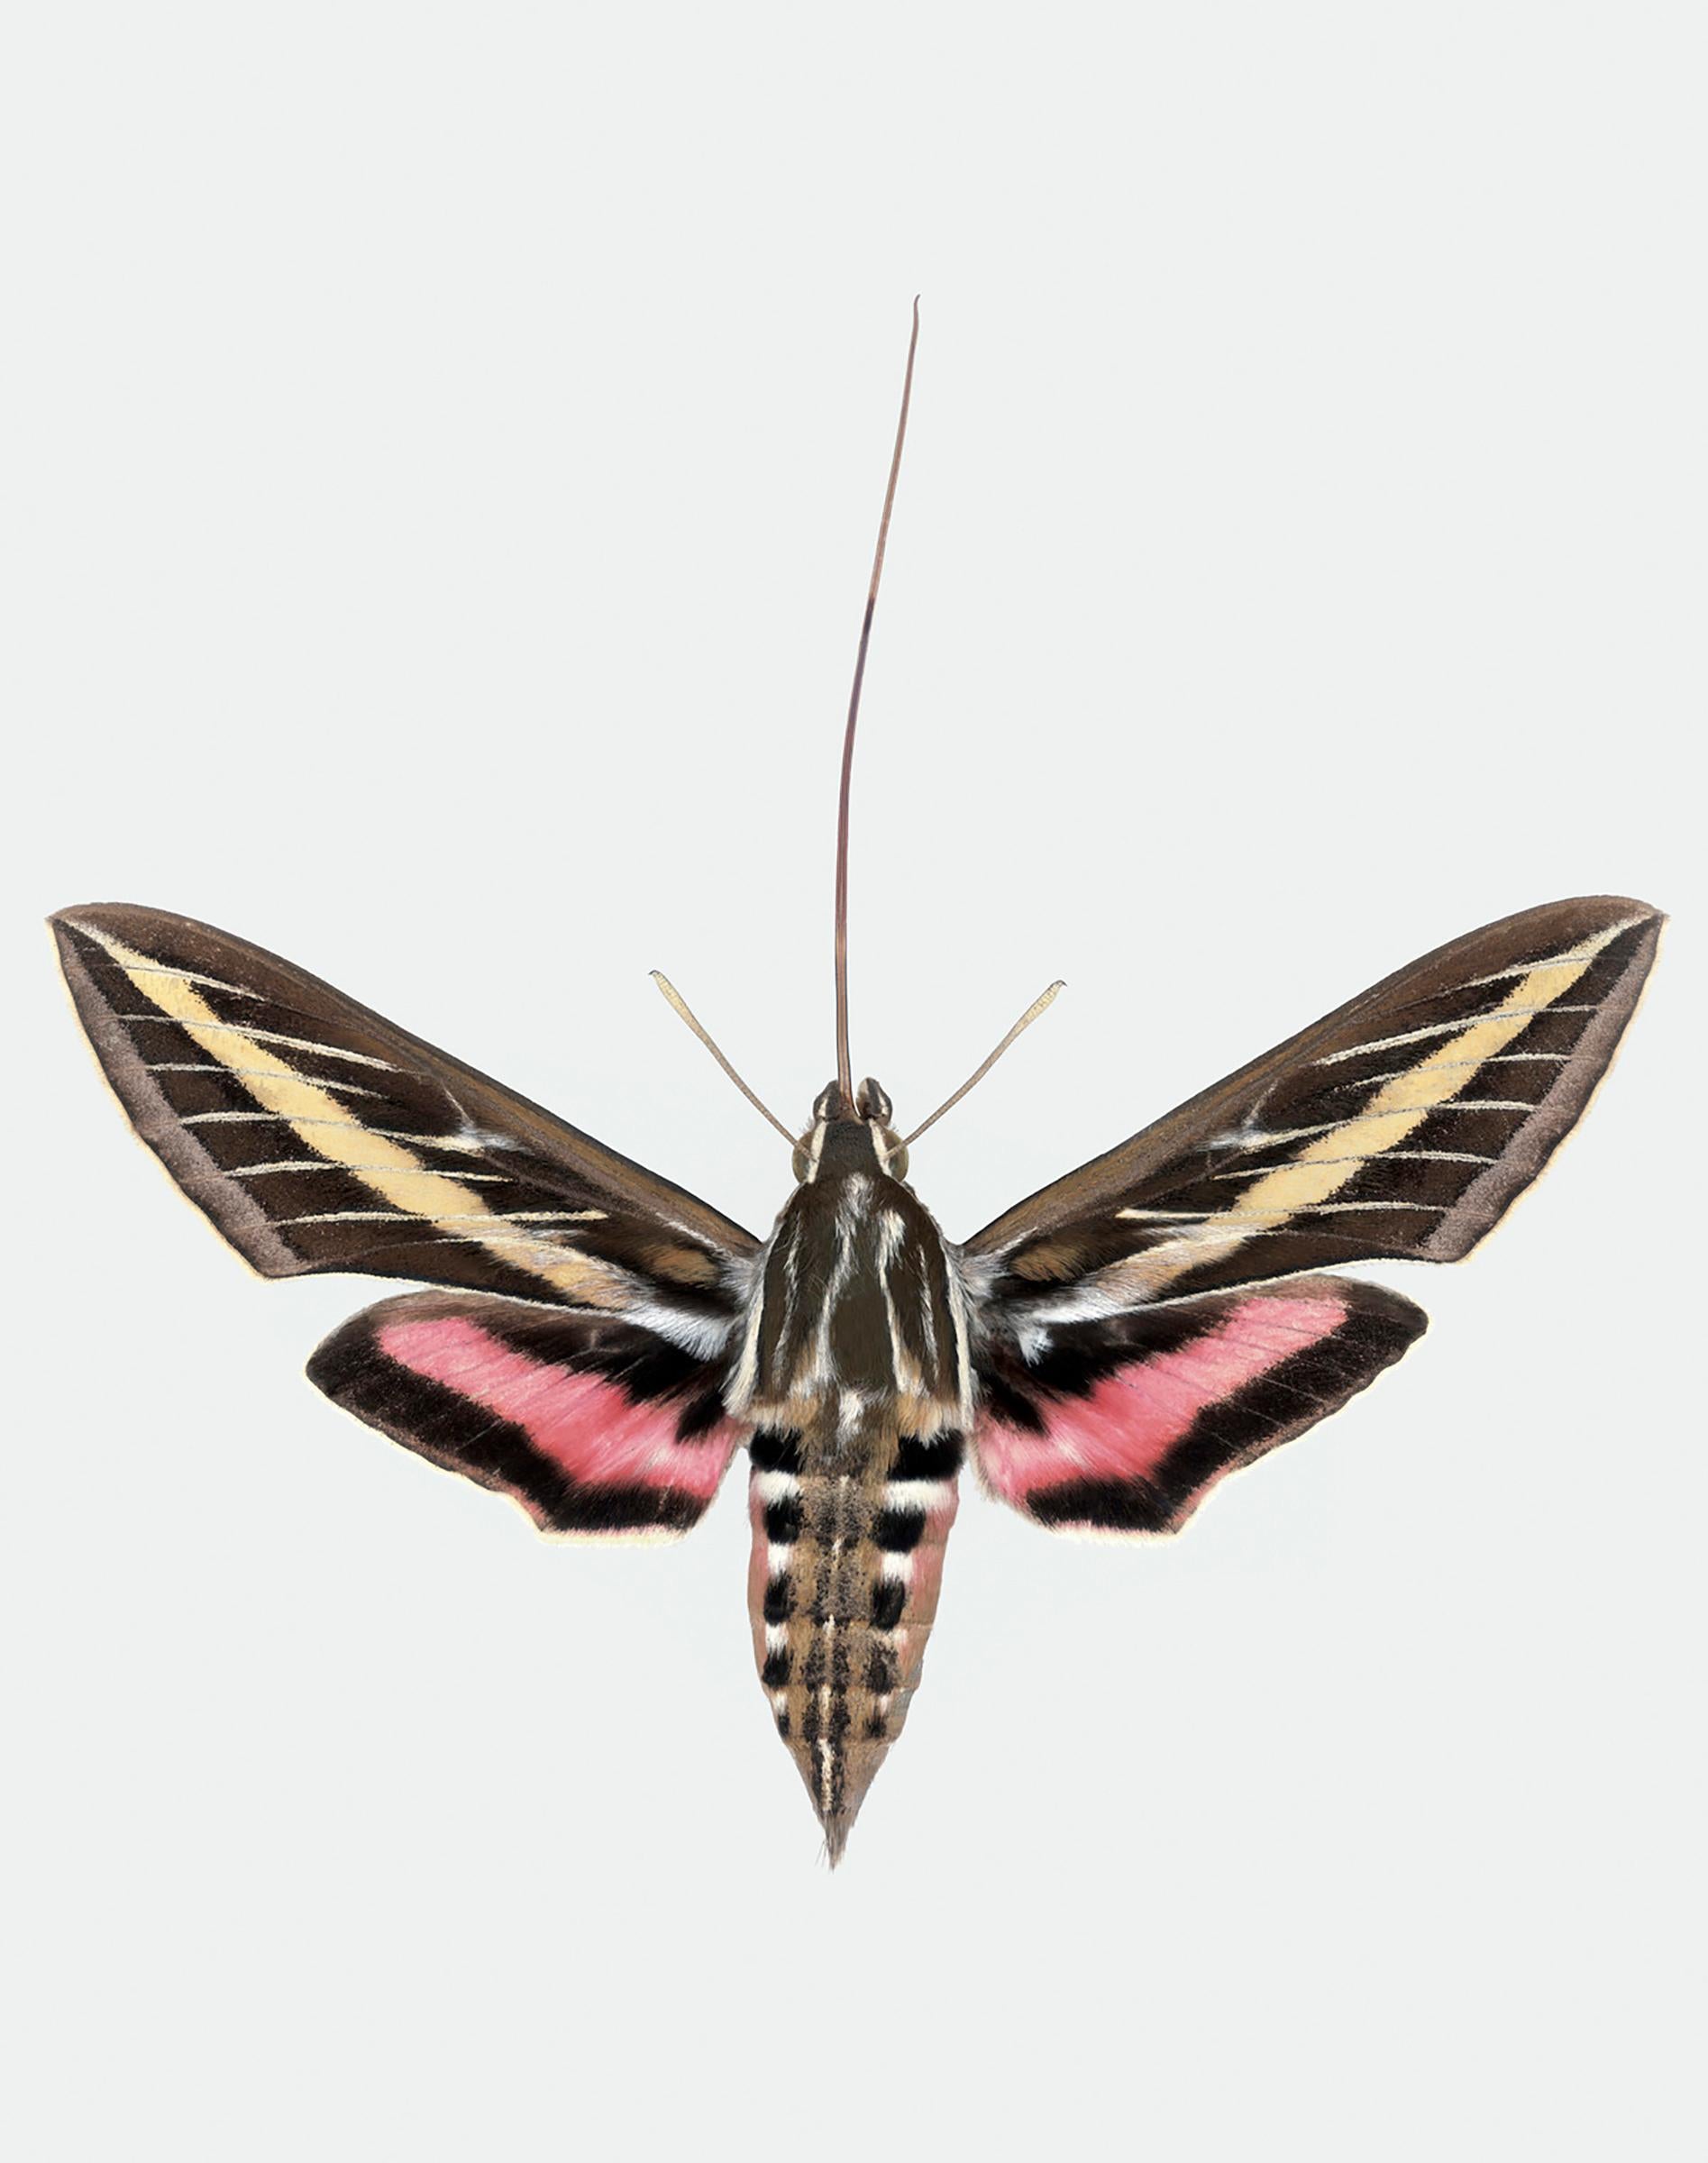 Joseph Scheer Color Photograph - Hyles Lineata, Yellow, Pink, Brown, White Nature Moth Insect Photograph